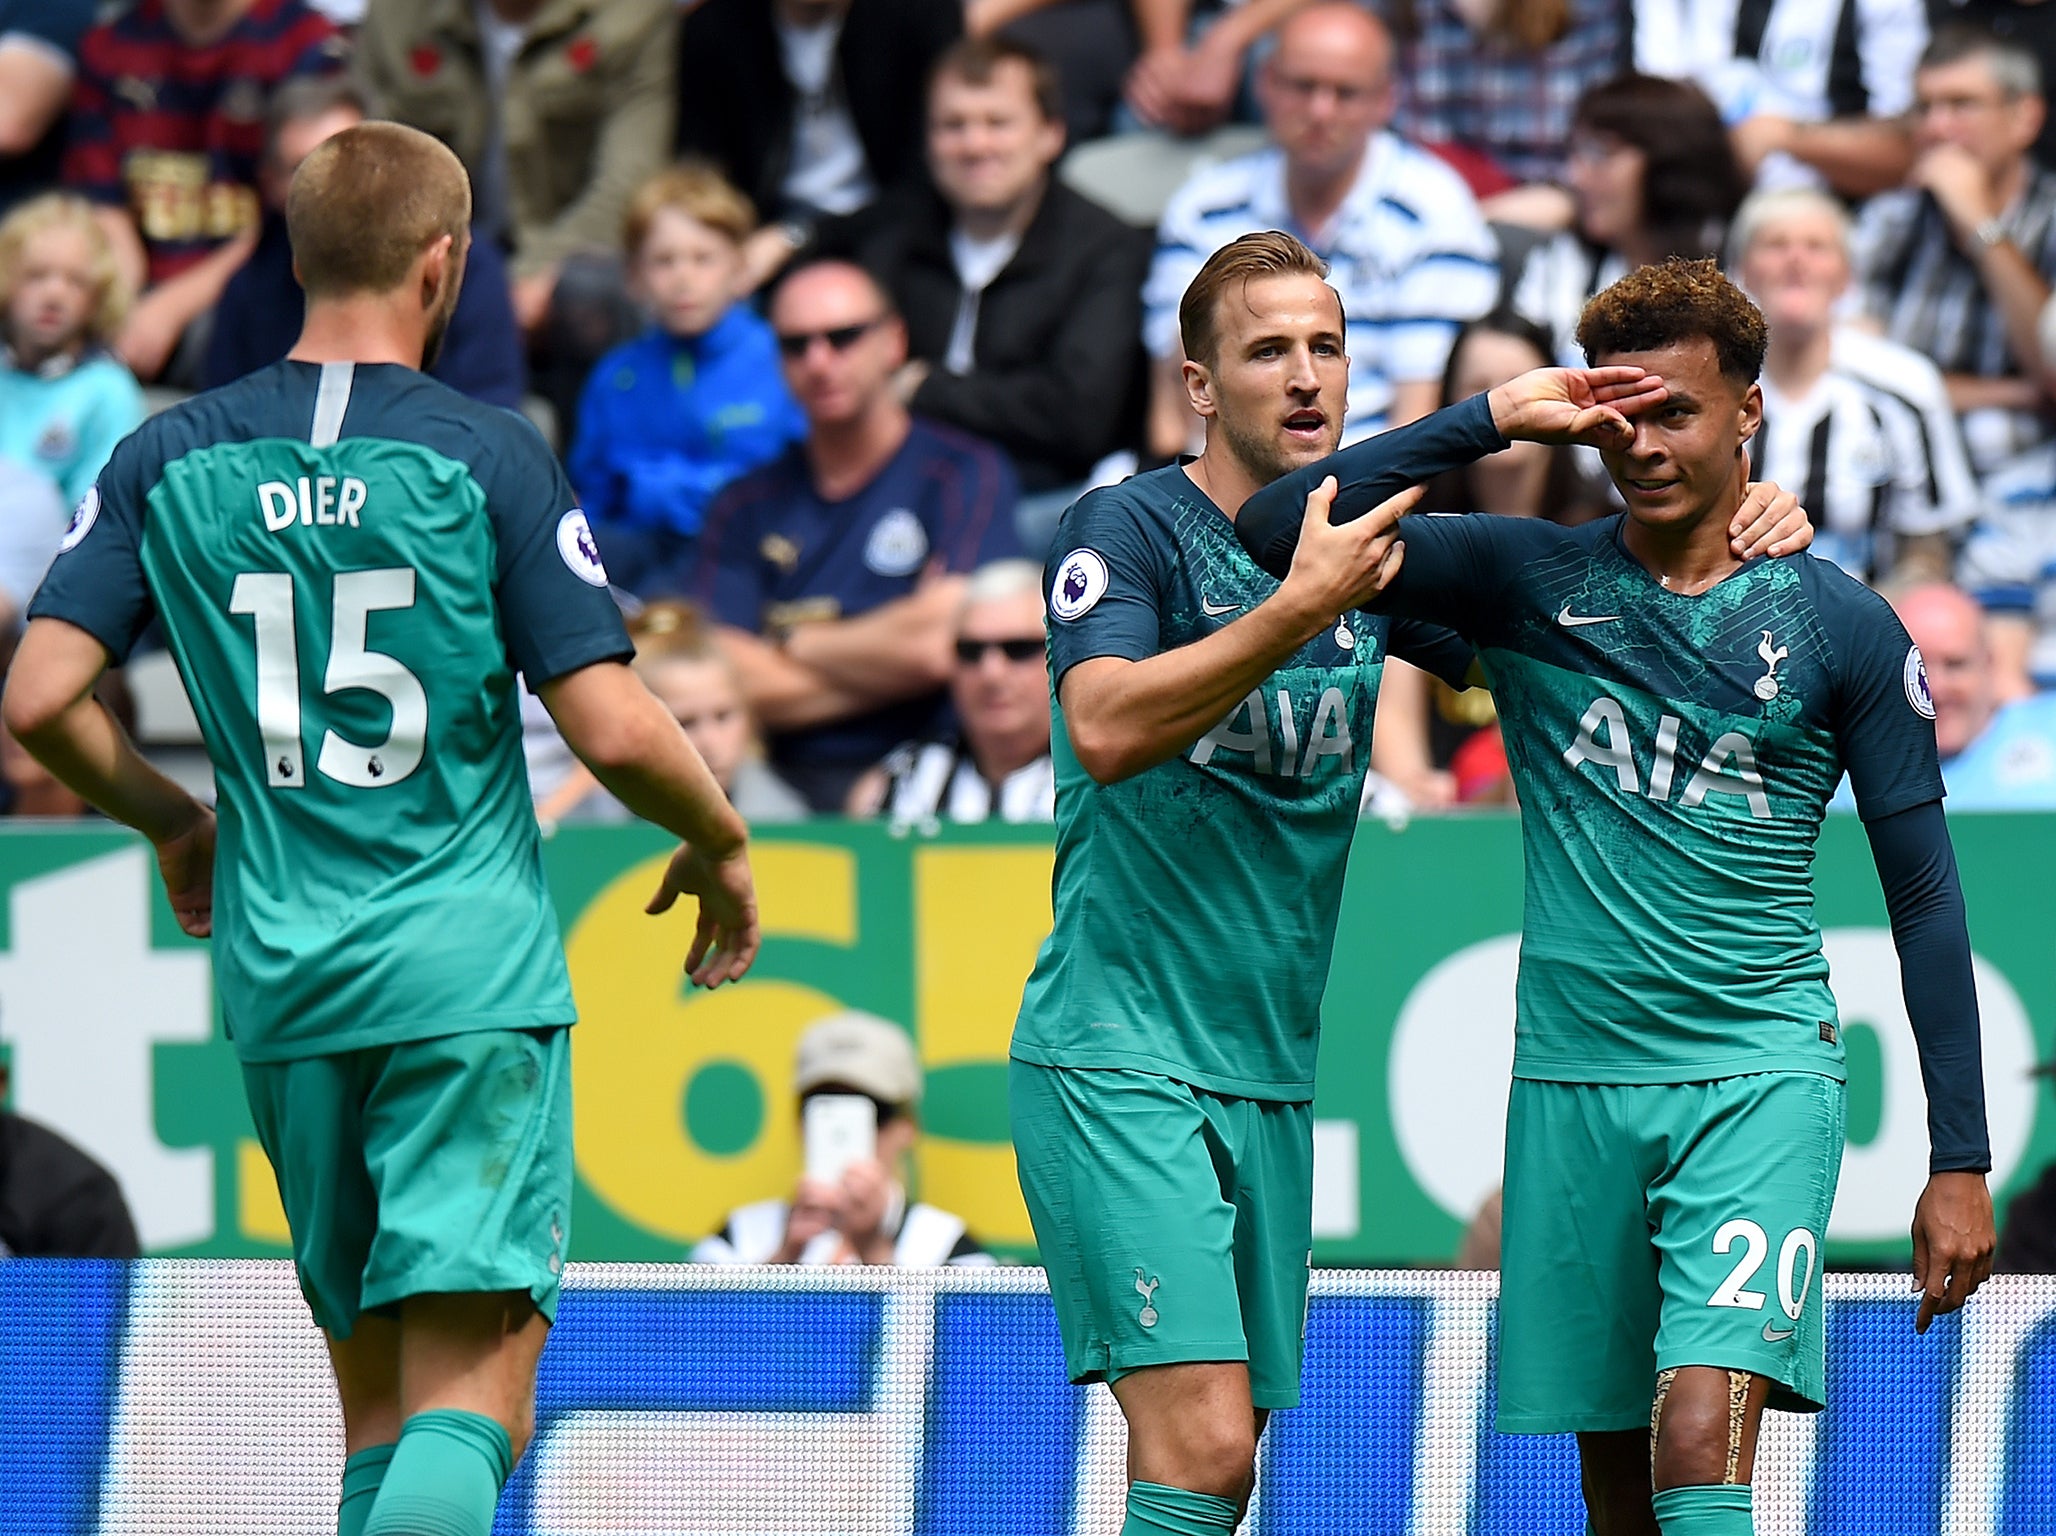 Dele Alli is congratulated after his winning goal